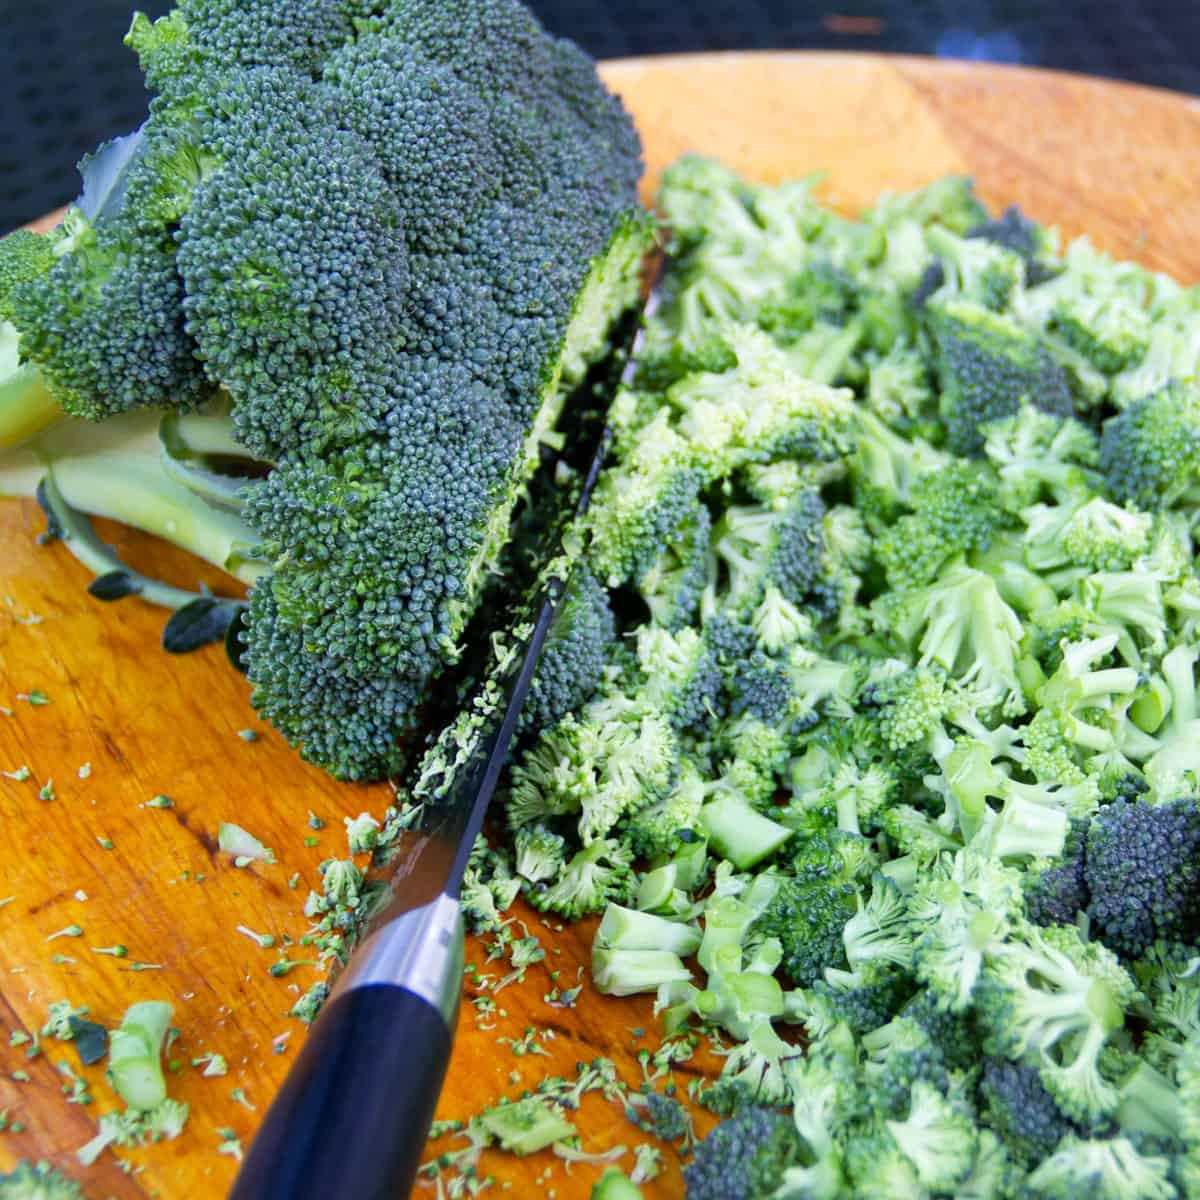 a head of broccoli being shaved with a large knife, into small pieces, on a wooden cutting board.